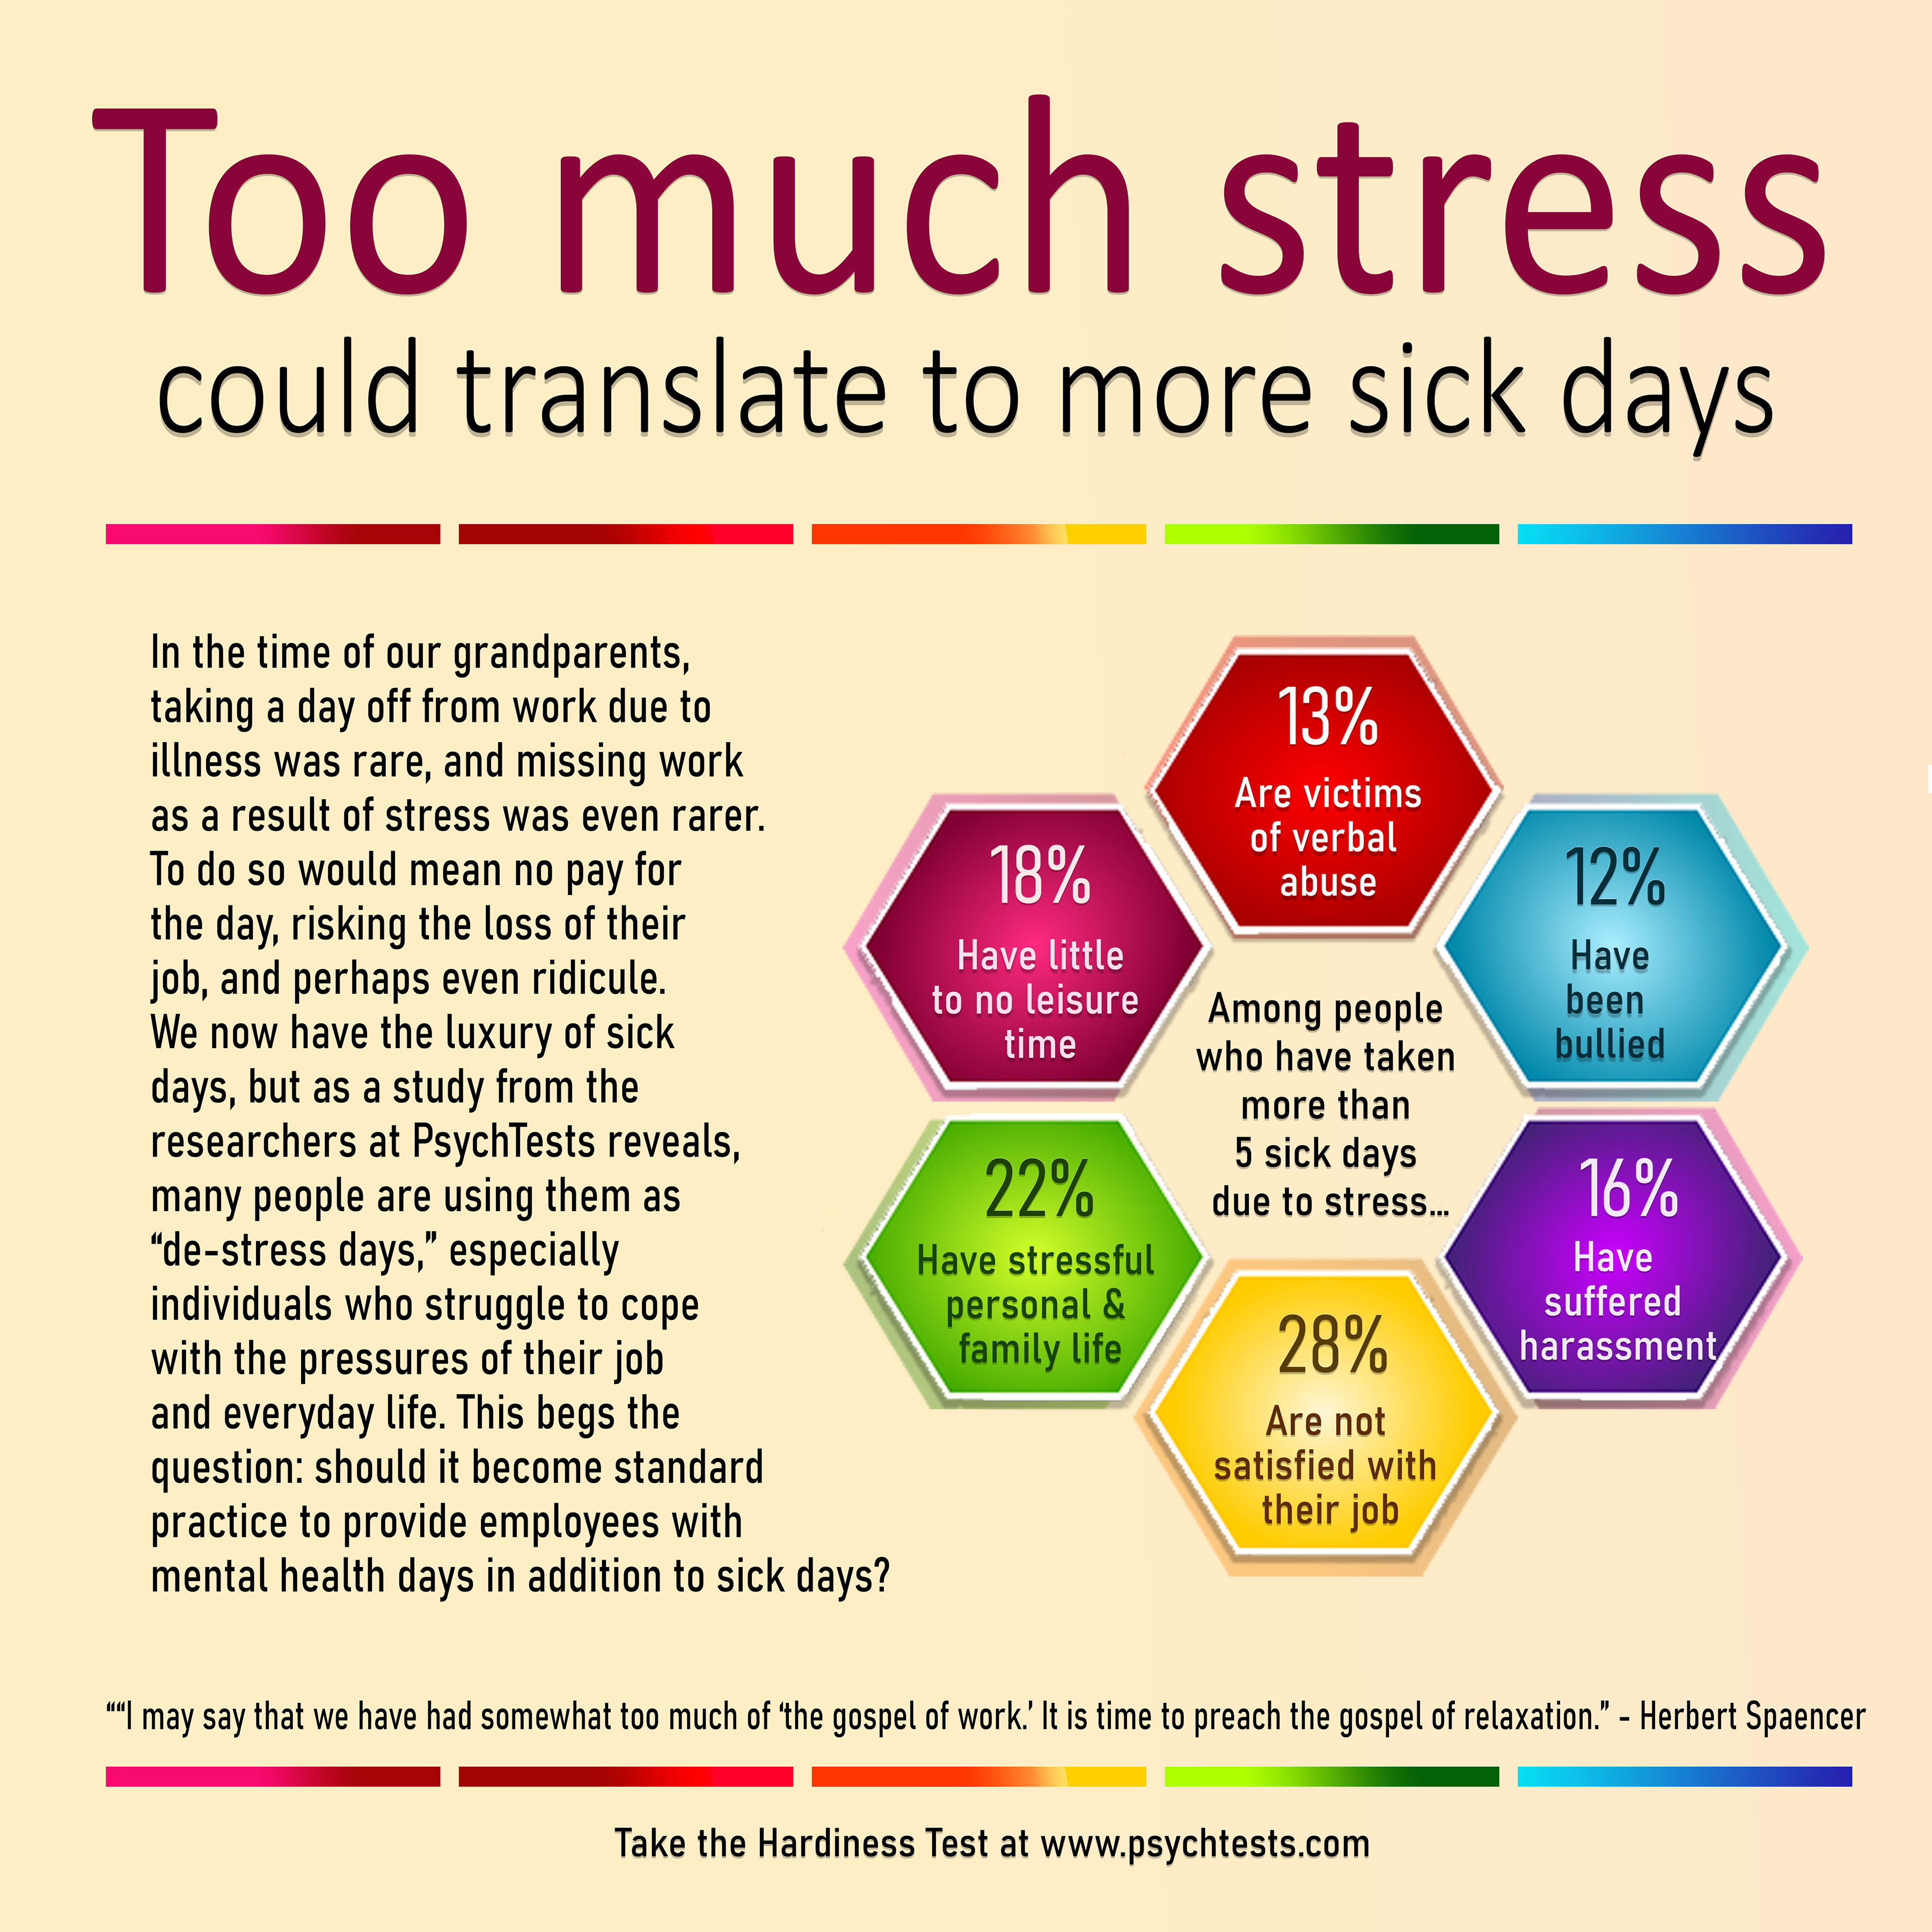 People who struggle with a stressful job are more likely to use sick days in order to recover.